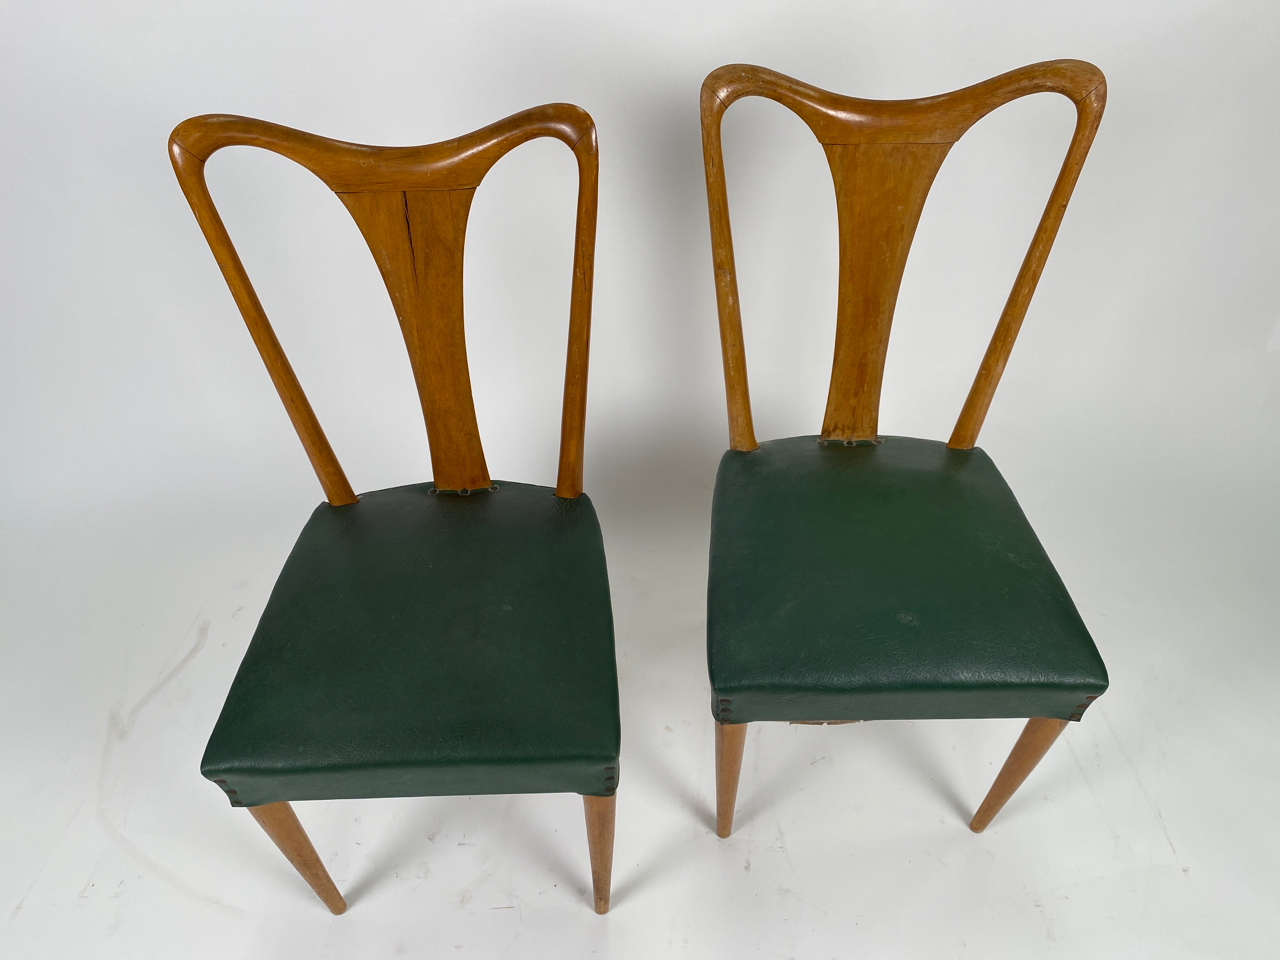 Pair of Ico Parisi Mid-Century Leather Chairs - Image 2 of 7